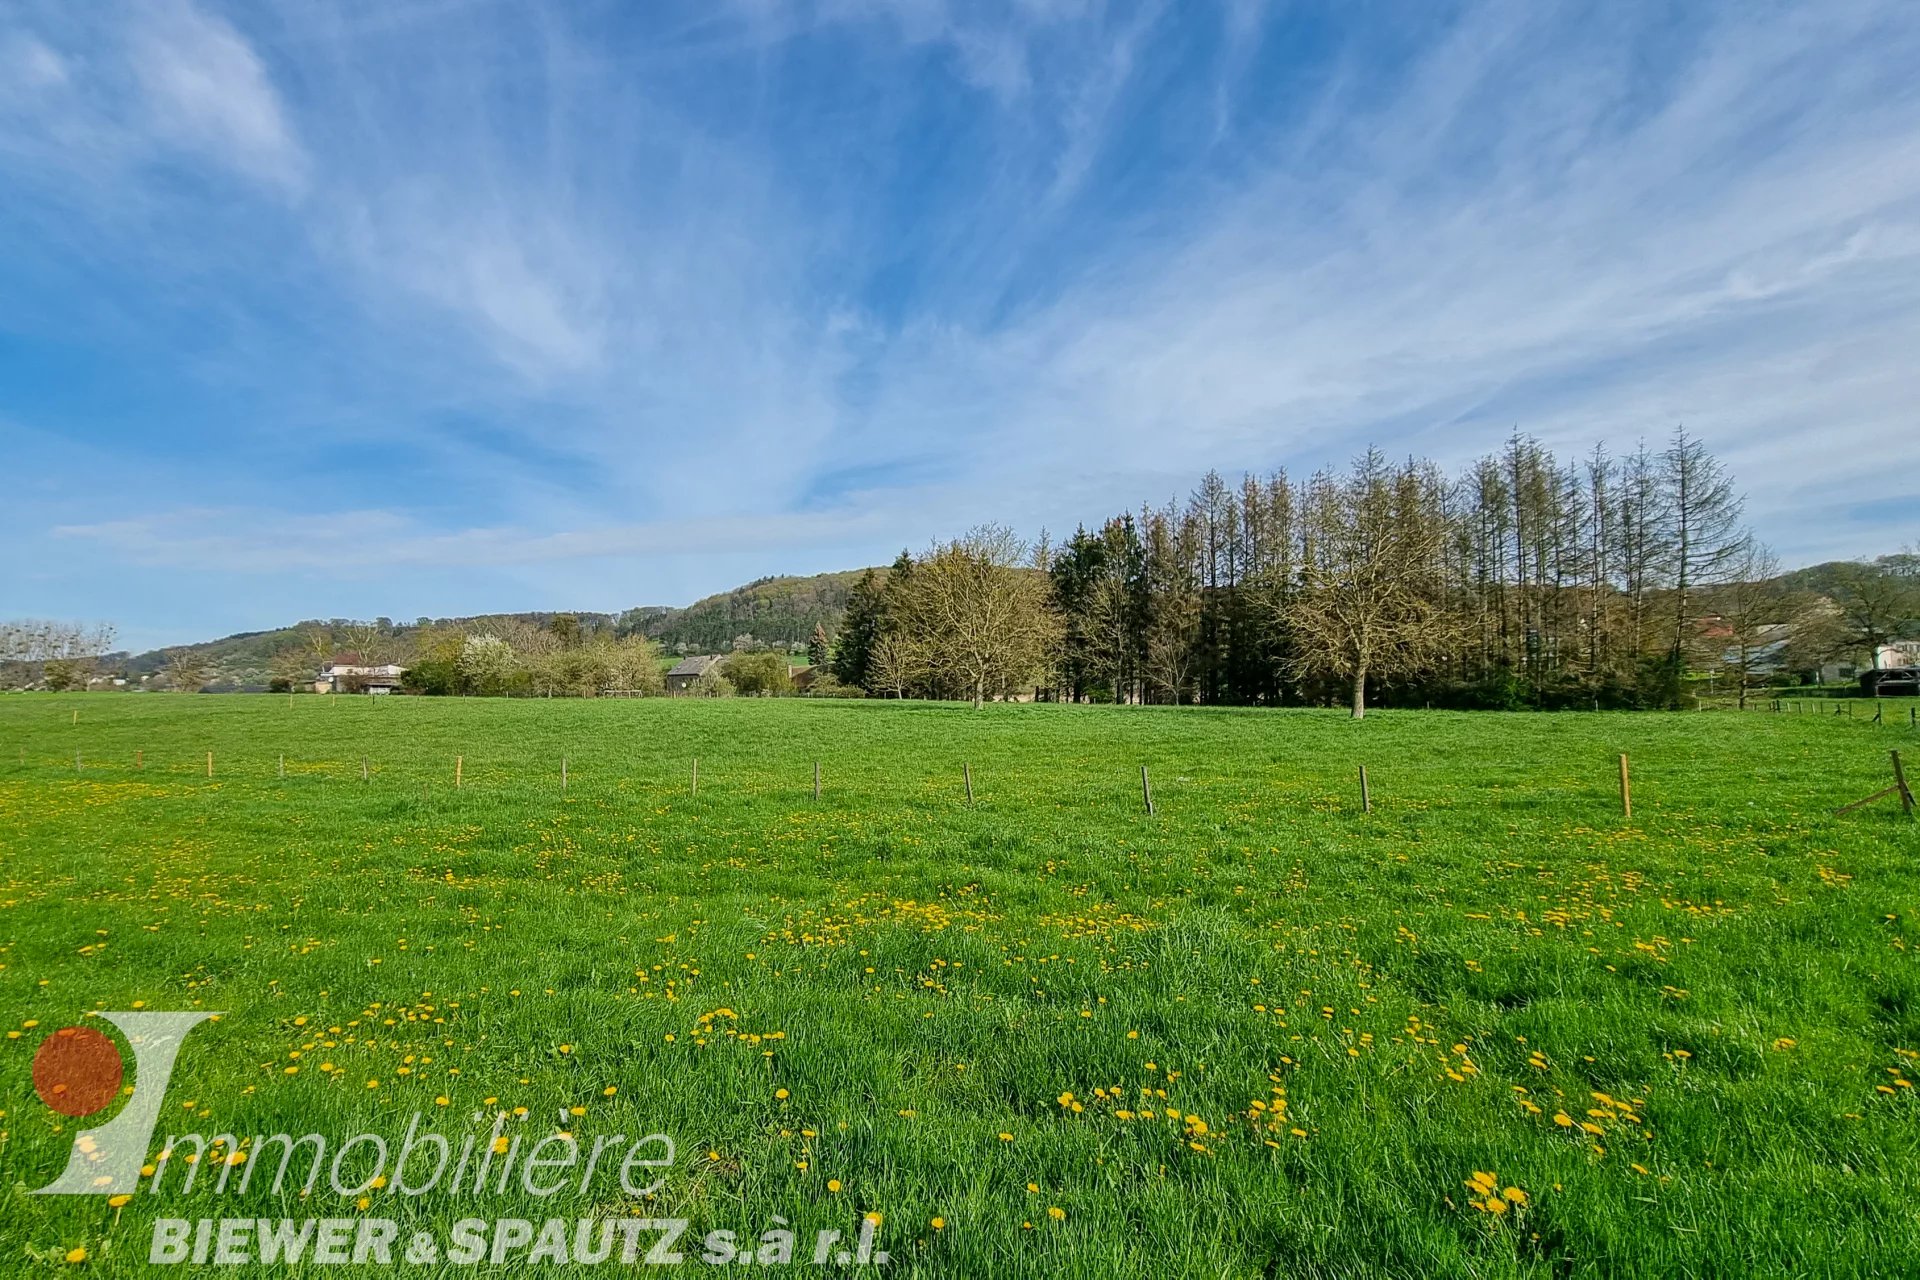 FOR SALE - Arable non-building land in Hemstal and Zittig